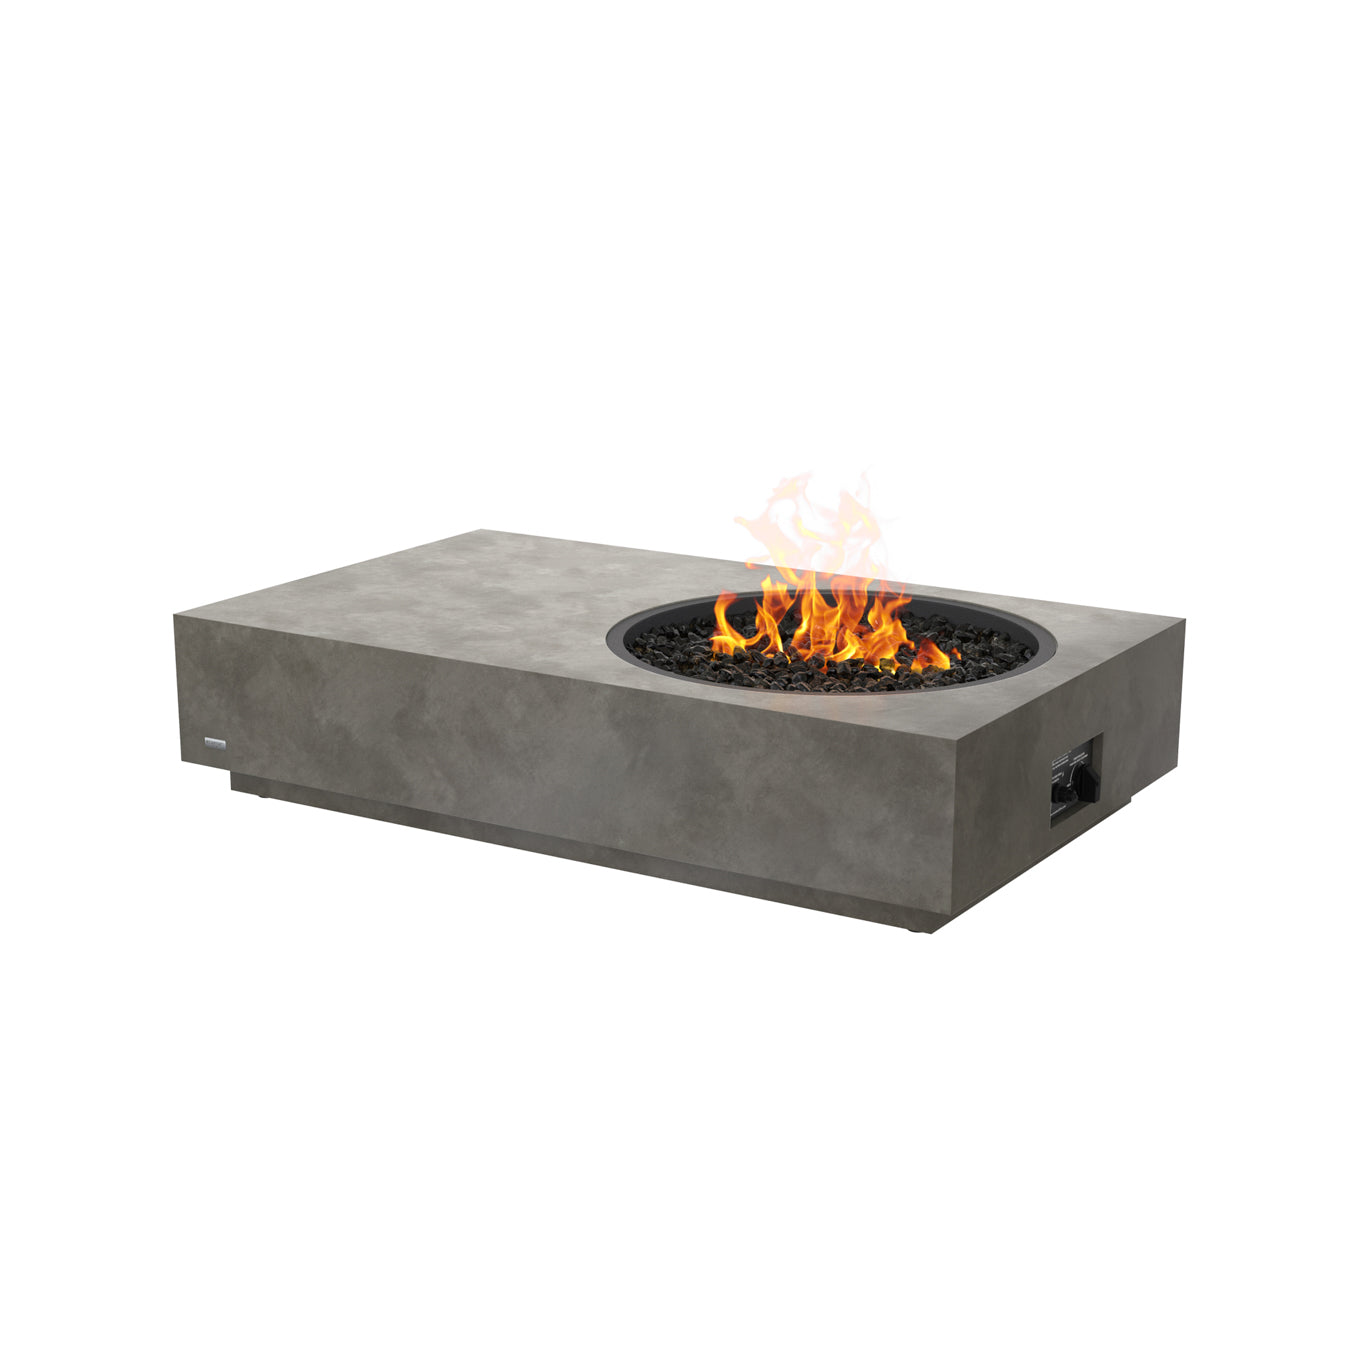 LARNACA FIRE PIT TABLE - NATURAL GAS / LIQUID PROPANE